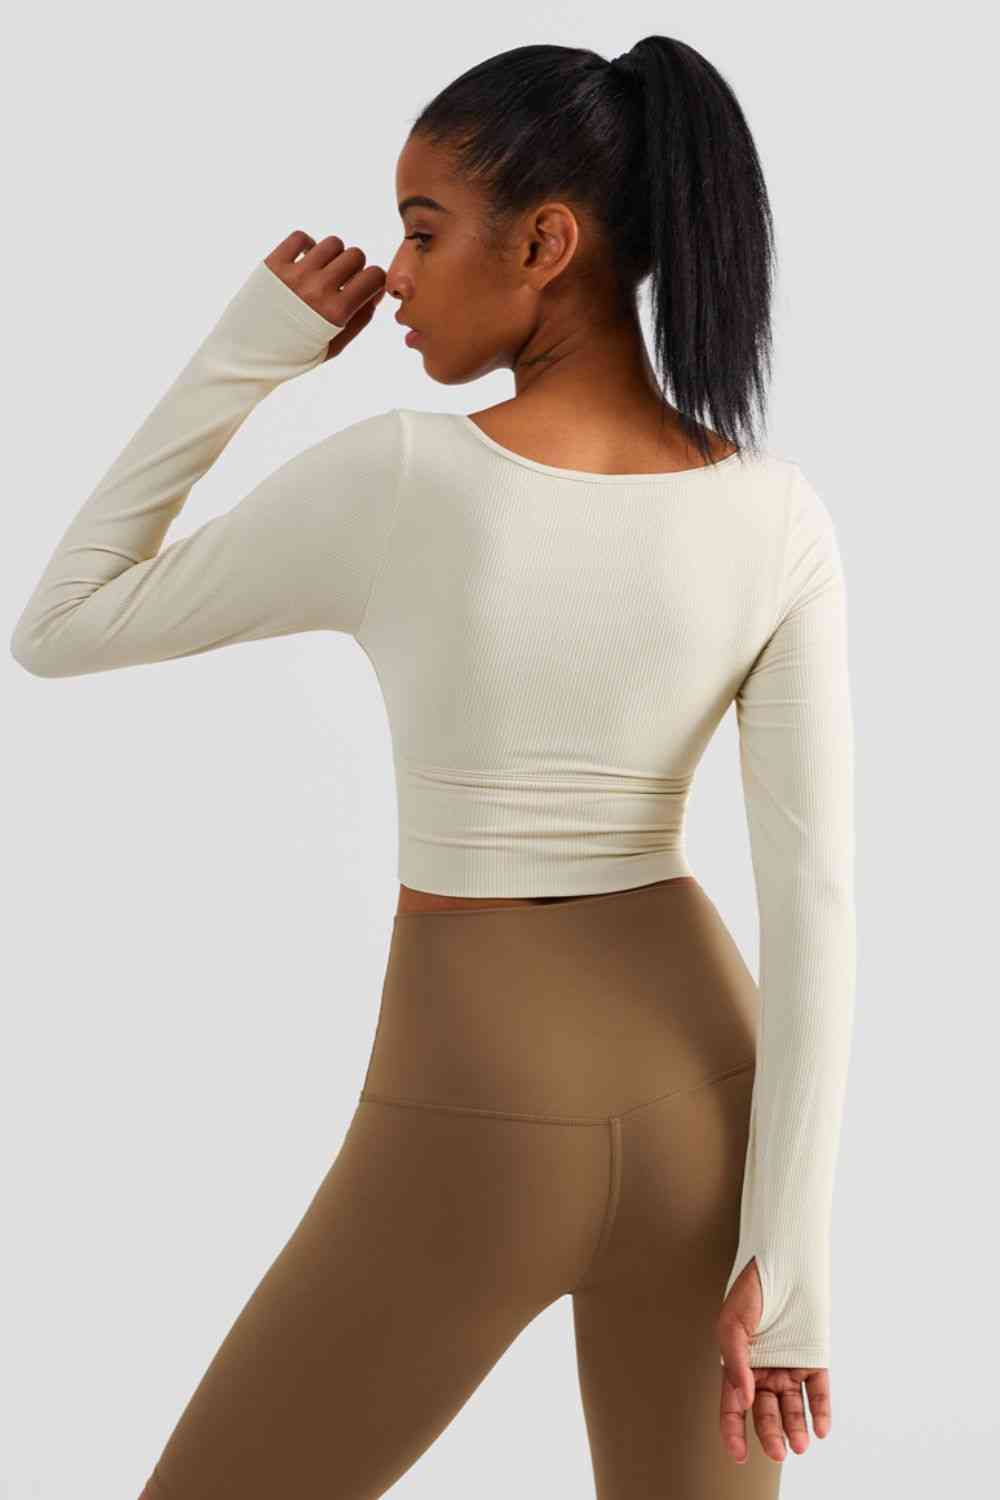 Scoop Neck Thumbhole Sleeve Cropped Sports Top - Sufyaa